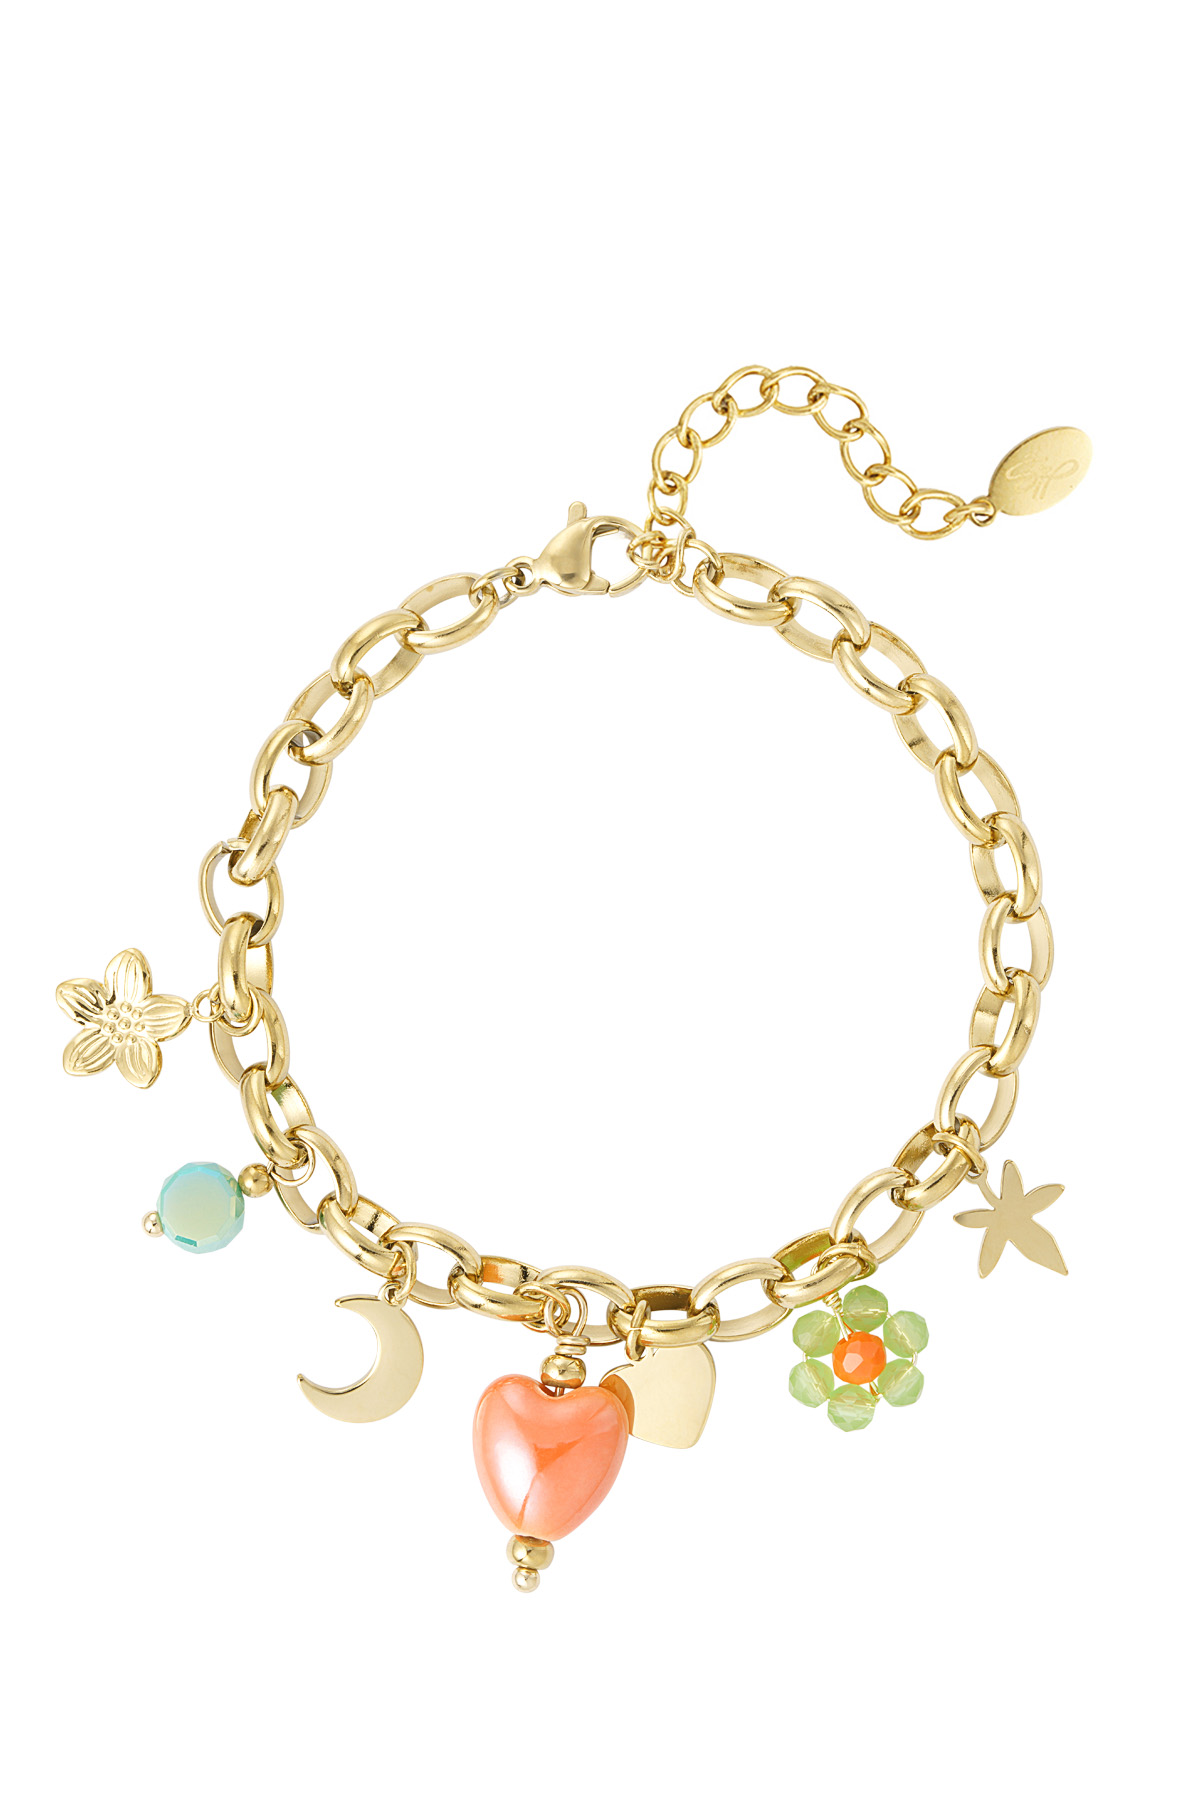 Charm bracelet with colored charms - gold